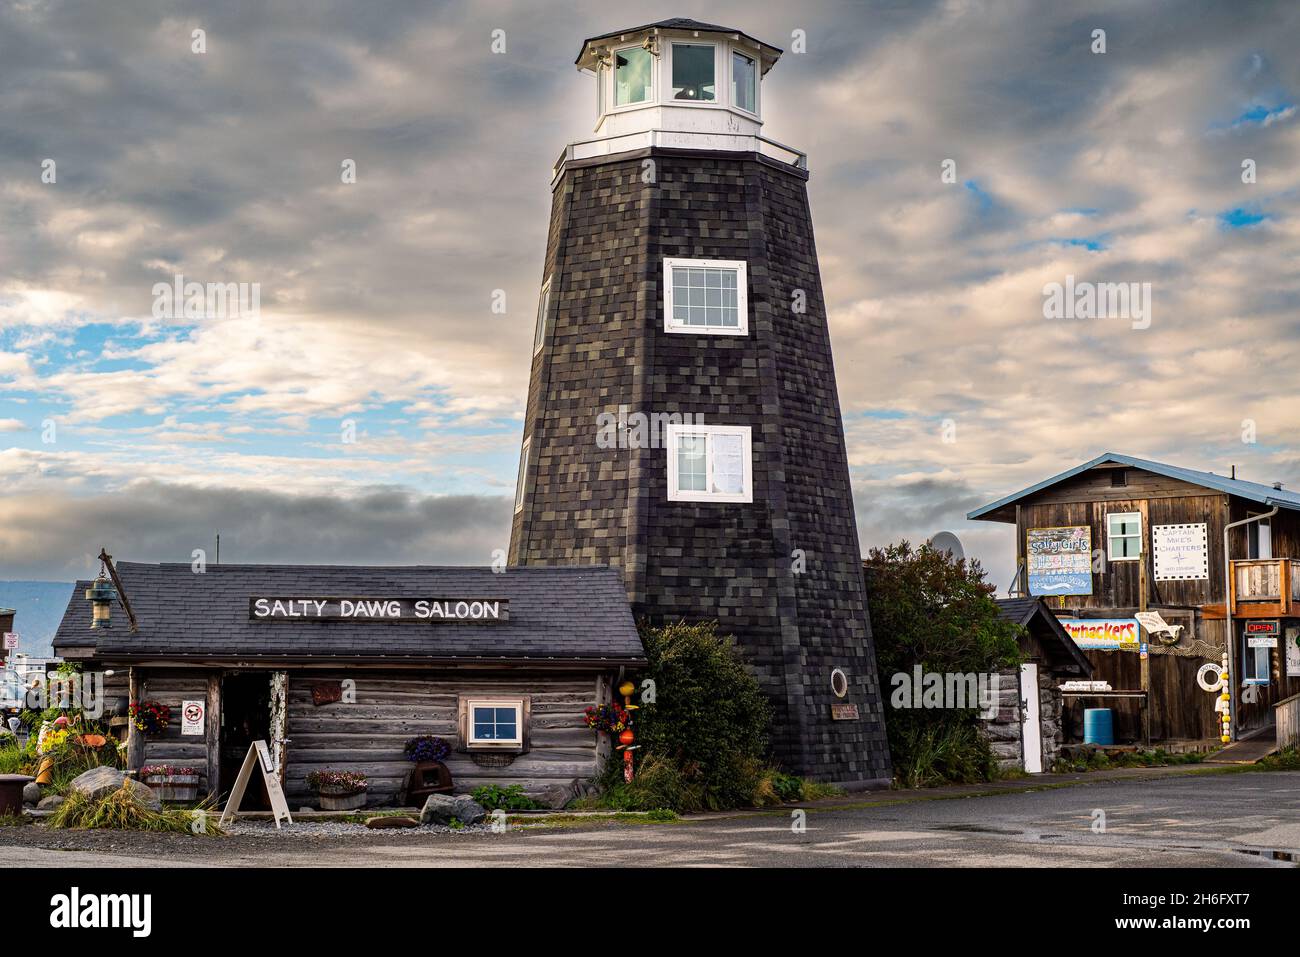 Homer Spit, Alaska, USA - August 07, 2018: The famous Homer Spit lighthouse and pub Salty Dawg Salon Stock Photo